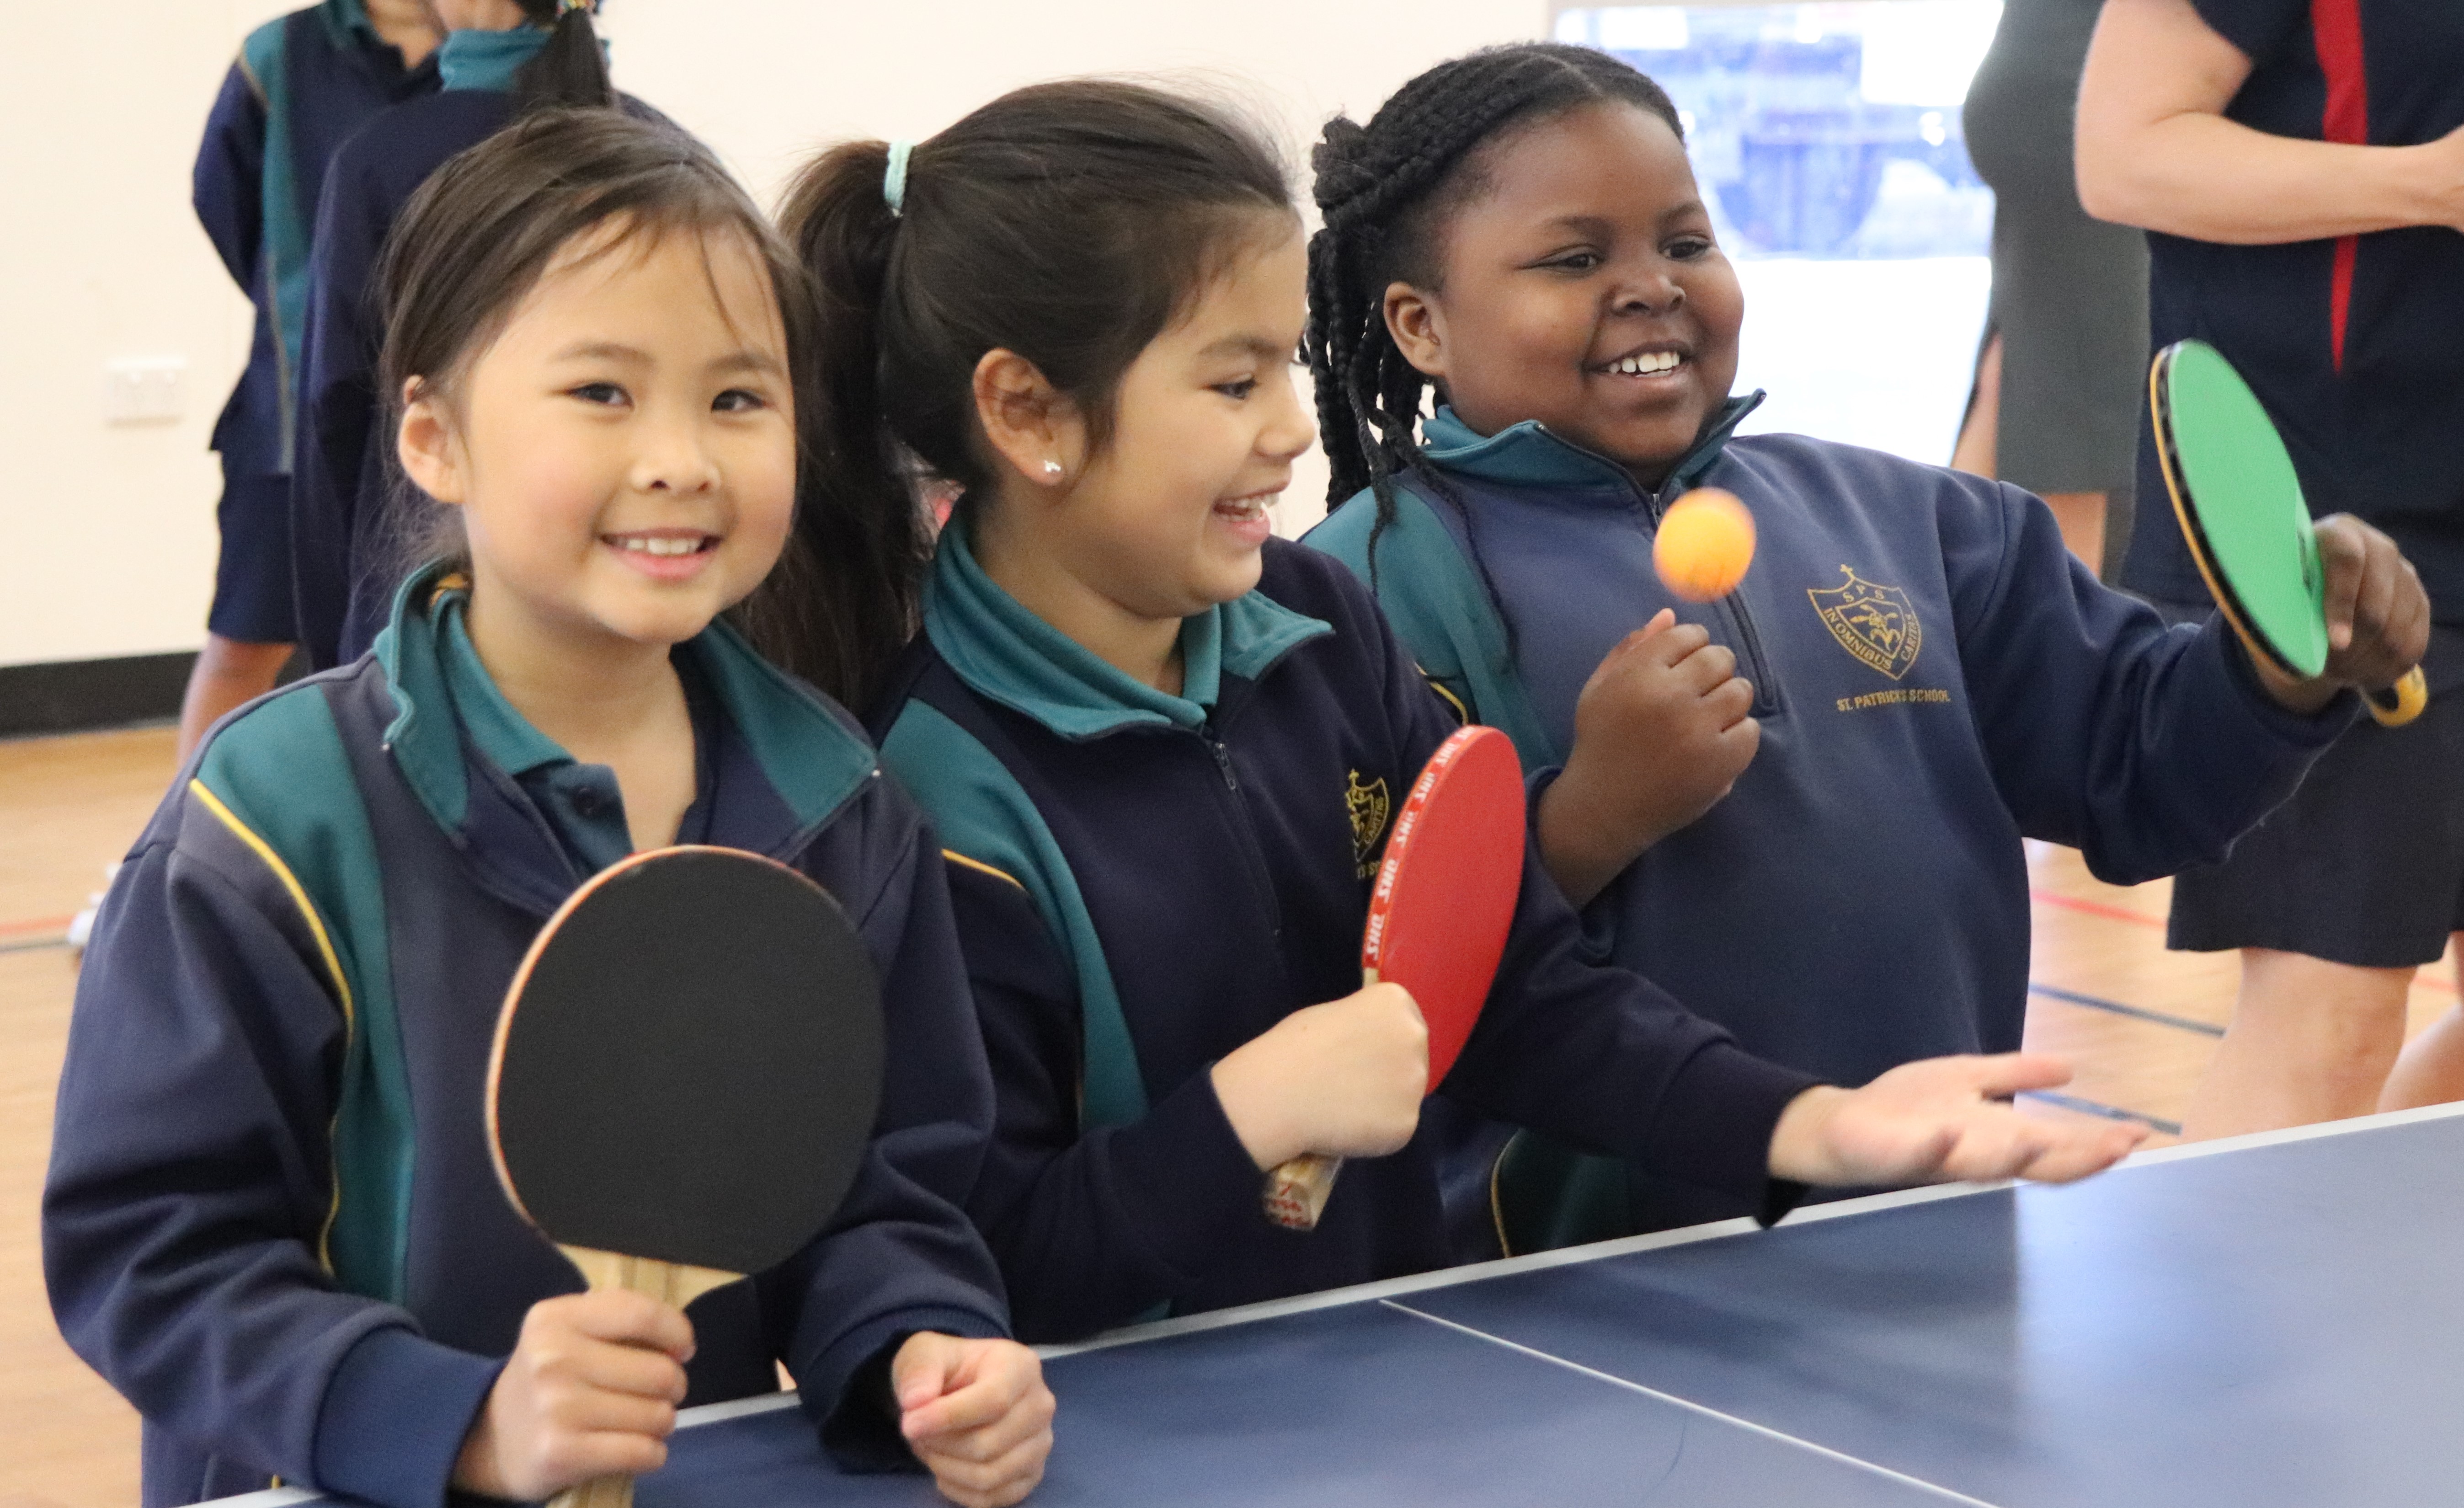 Children playing table tennis